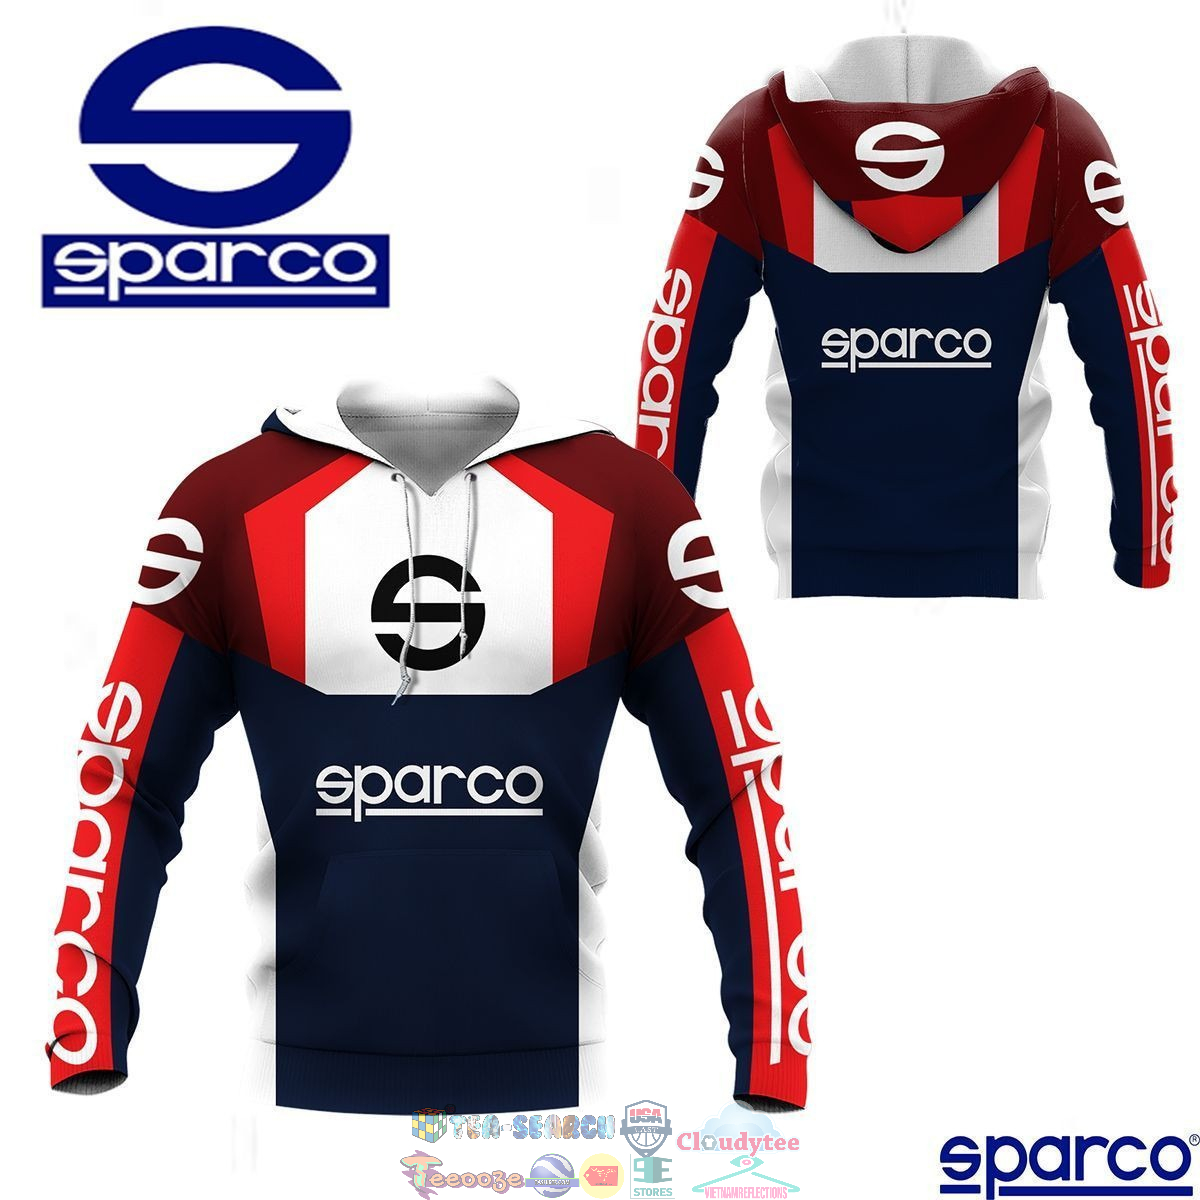 Sparco ver 28 3D hoodie and t-shirt